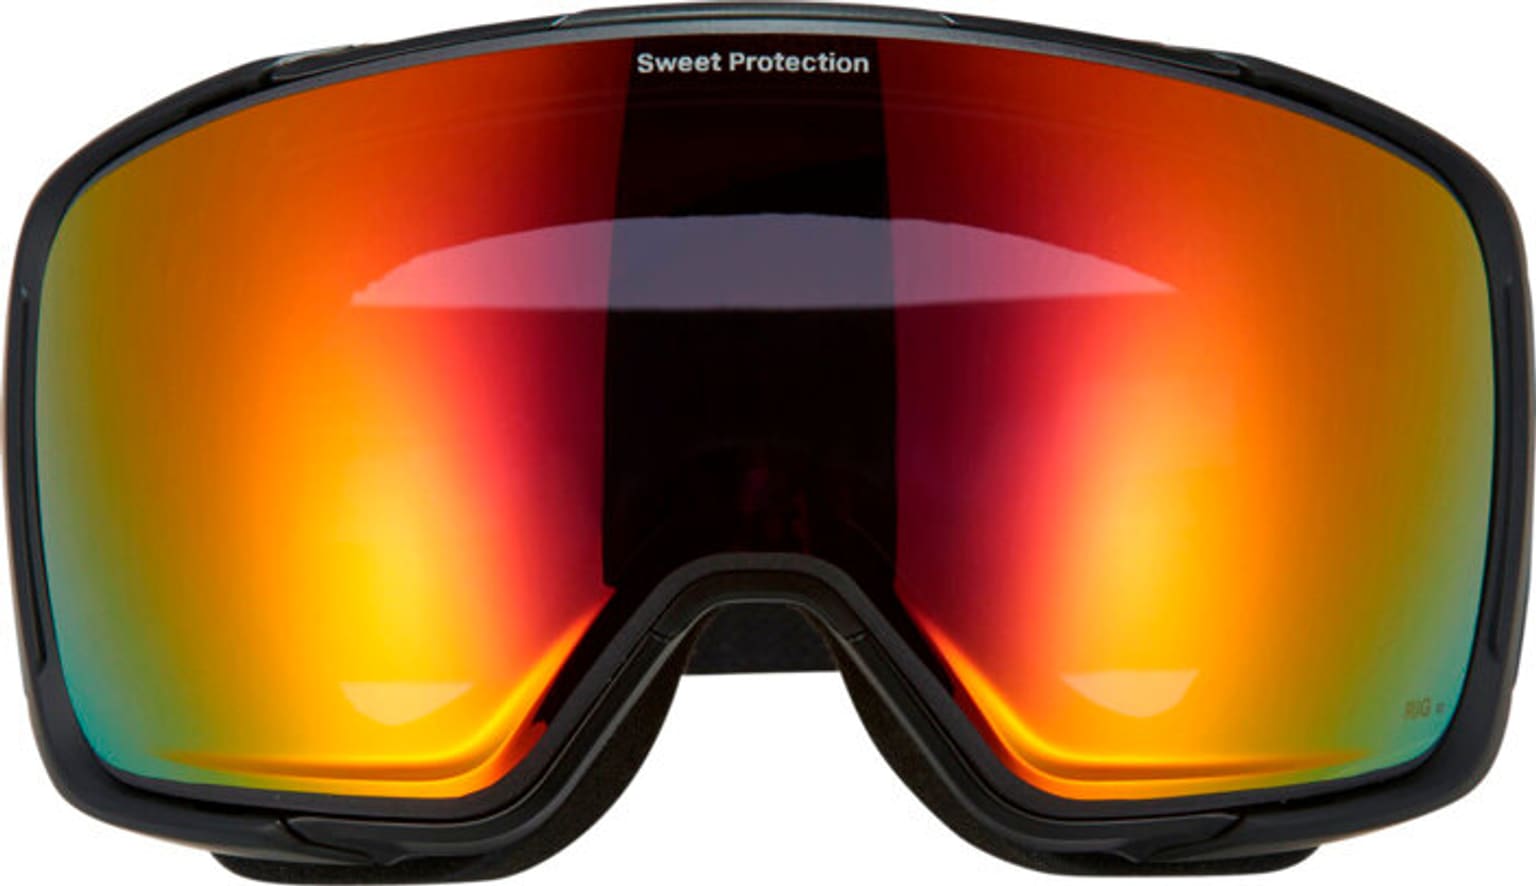 Sweet Protection Sweet Protection Interstellar RIG Reflect with Extra Lens Masque de ski noir 2